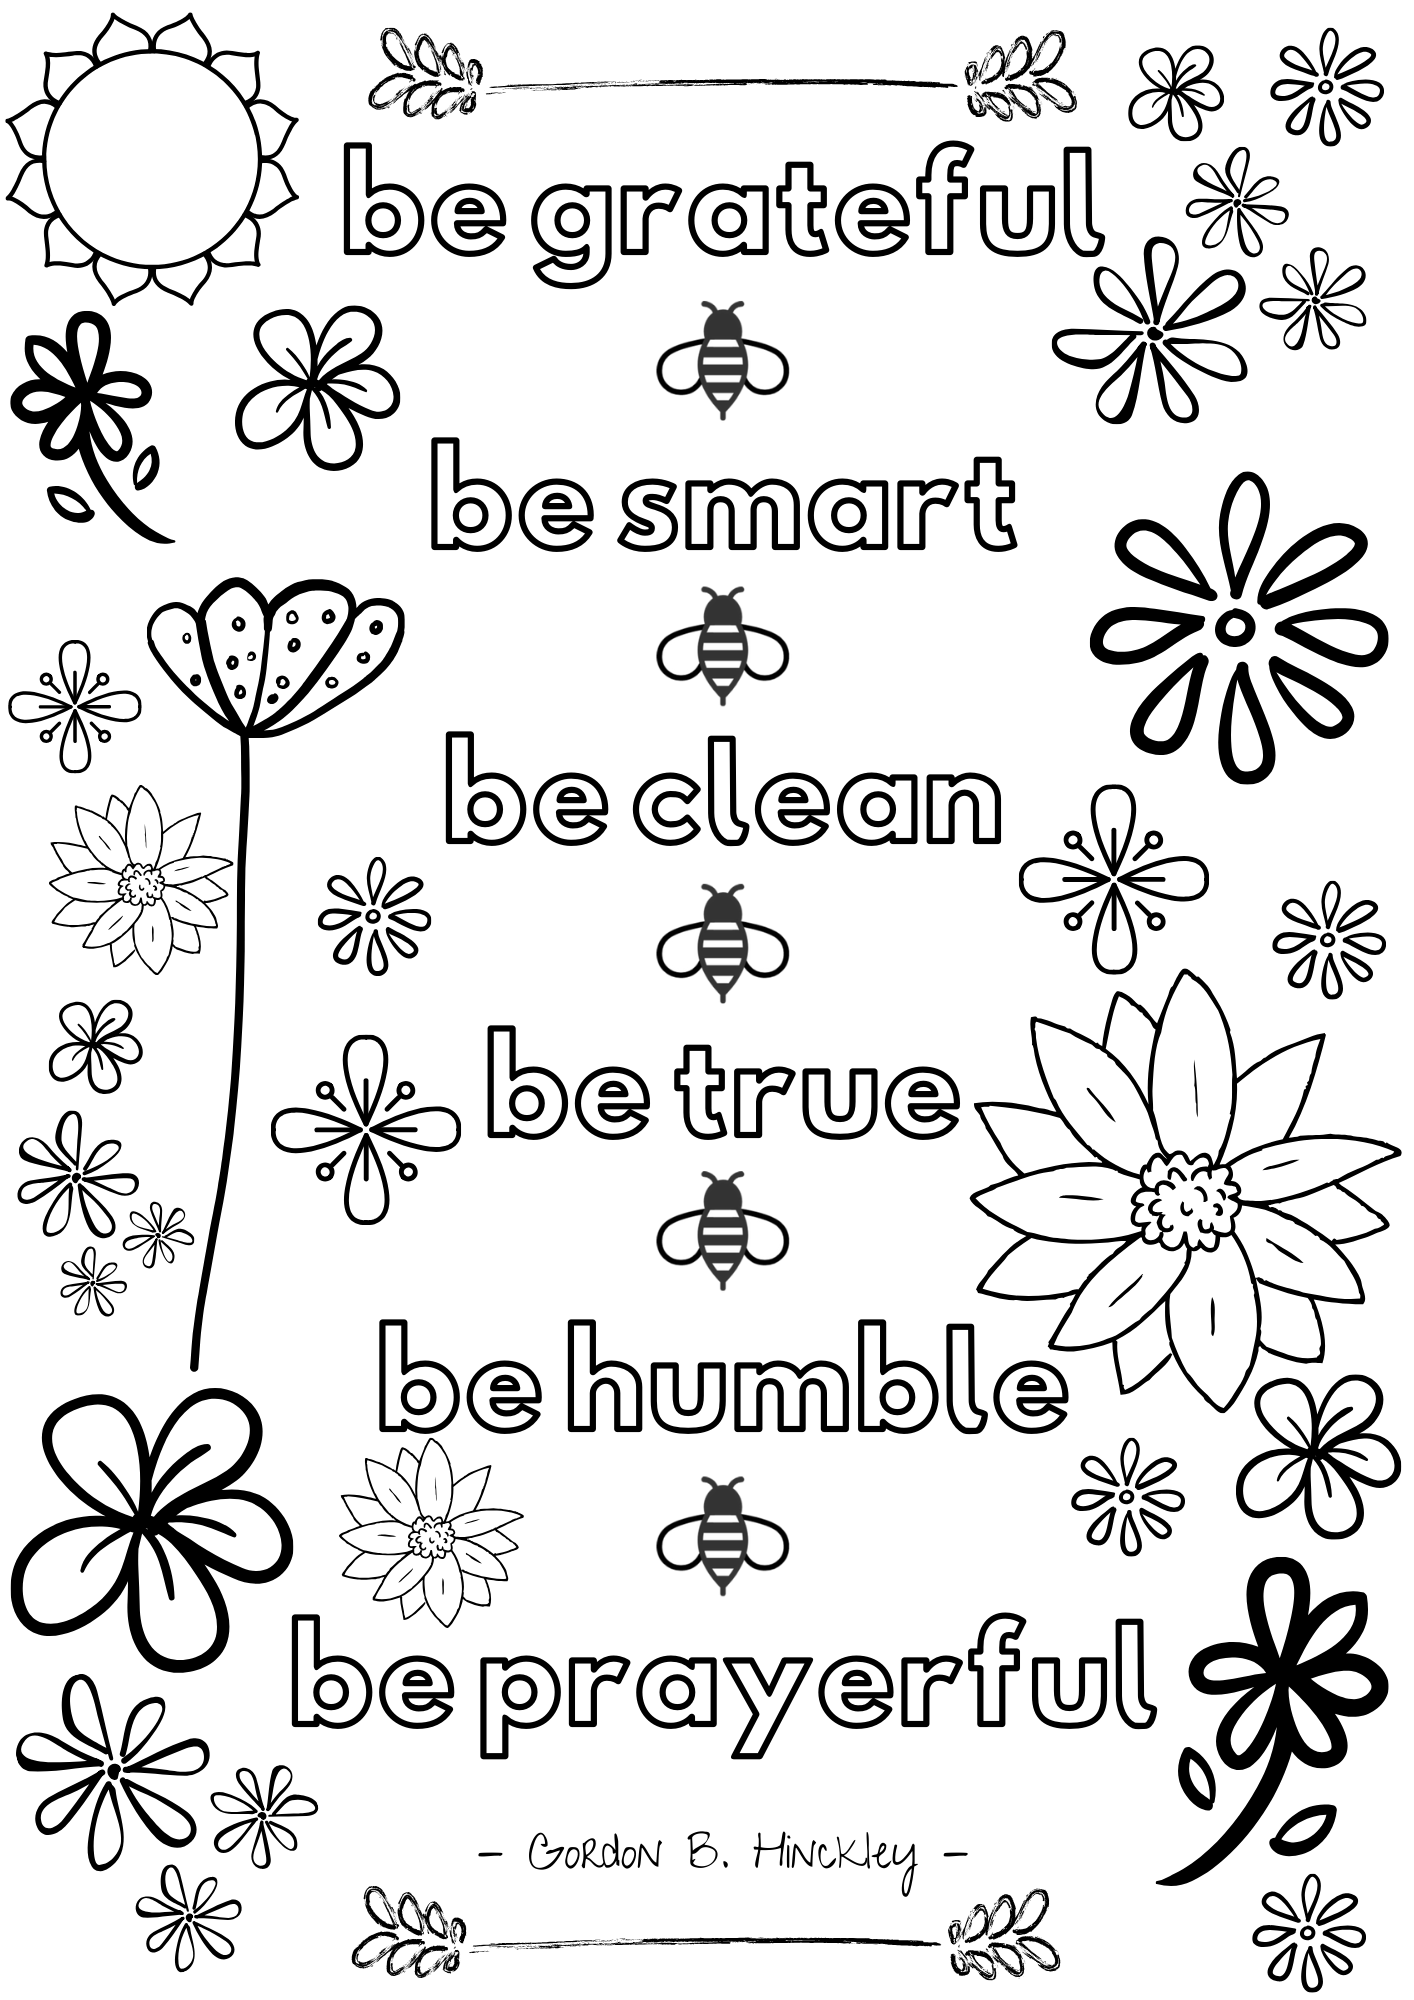 Be grateful, be smart, be clean, be true, be humble, be prayerful Gordon B. Hinckley coloring page LDS young women